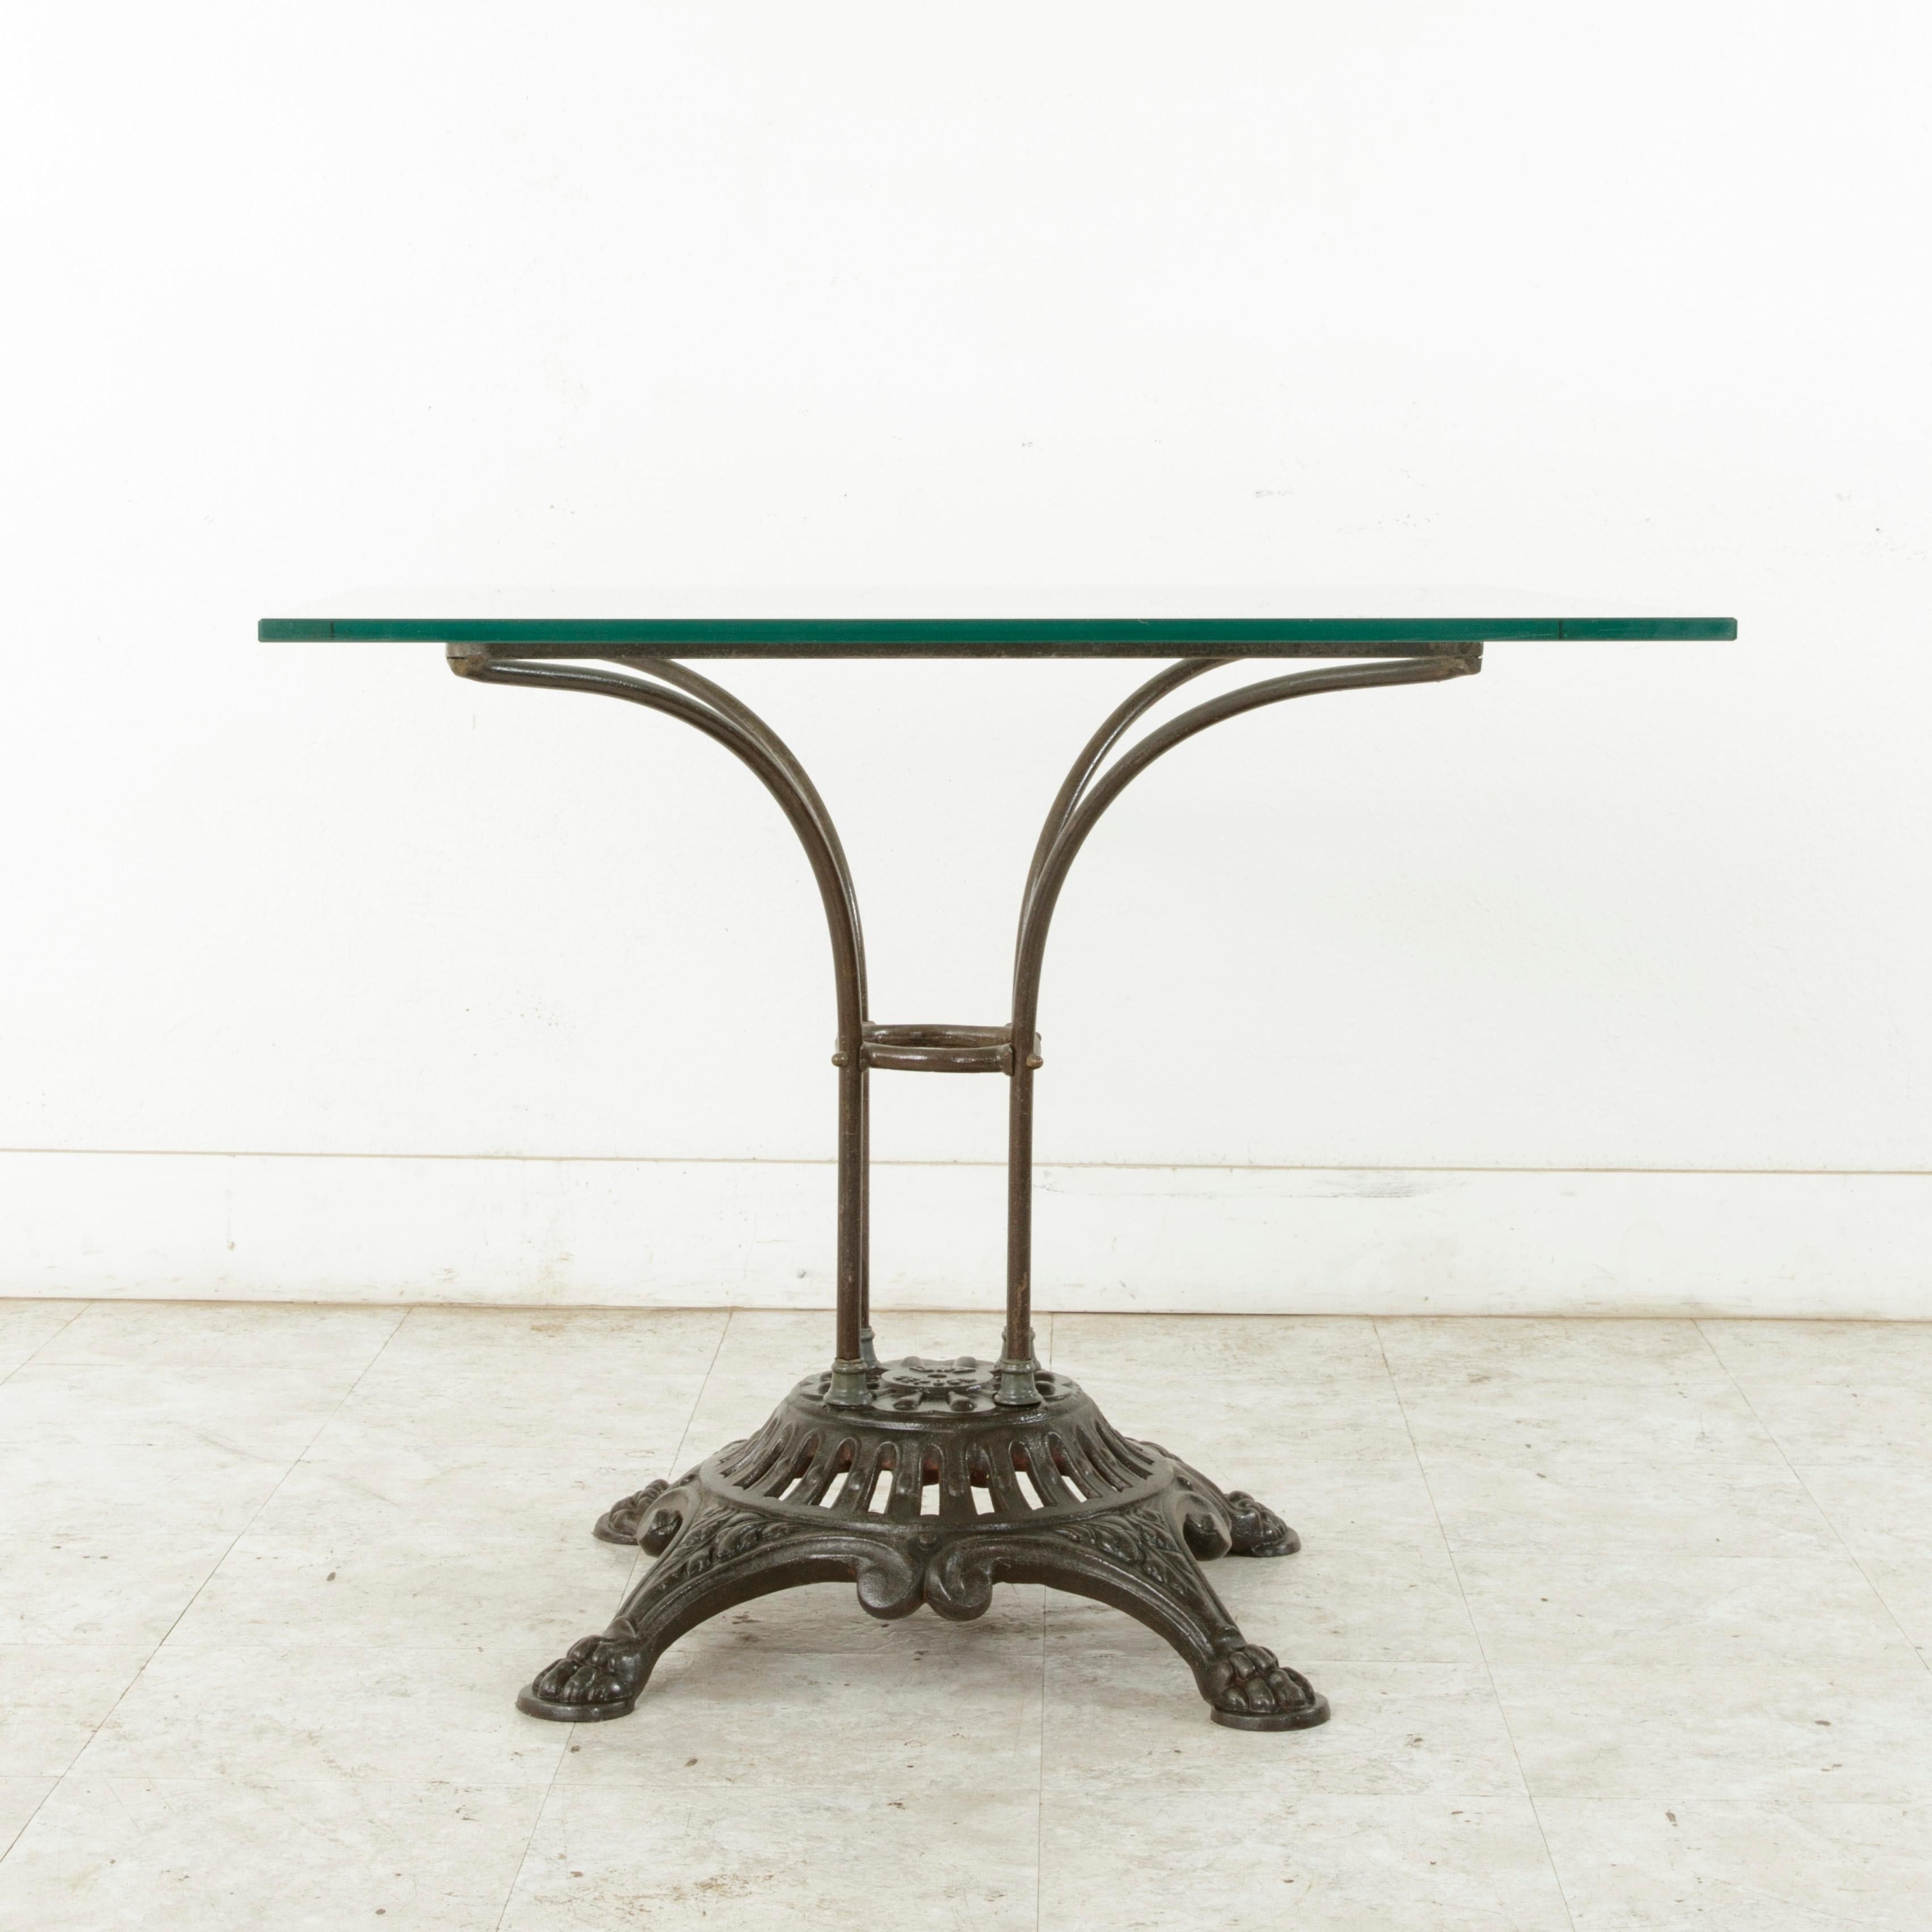 Early 20th Century French Garden Table with Pierced Iron Base and Square Glass Top, circa 1900